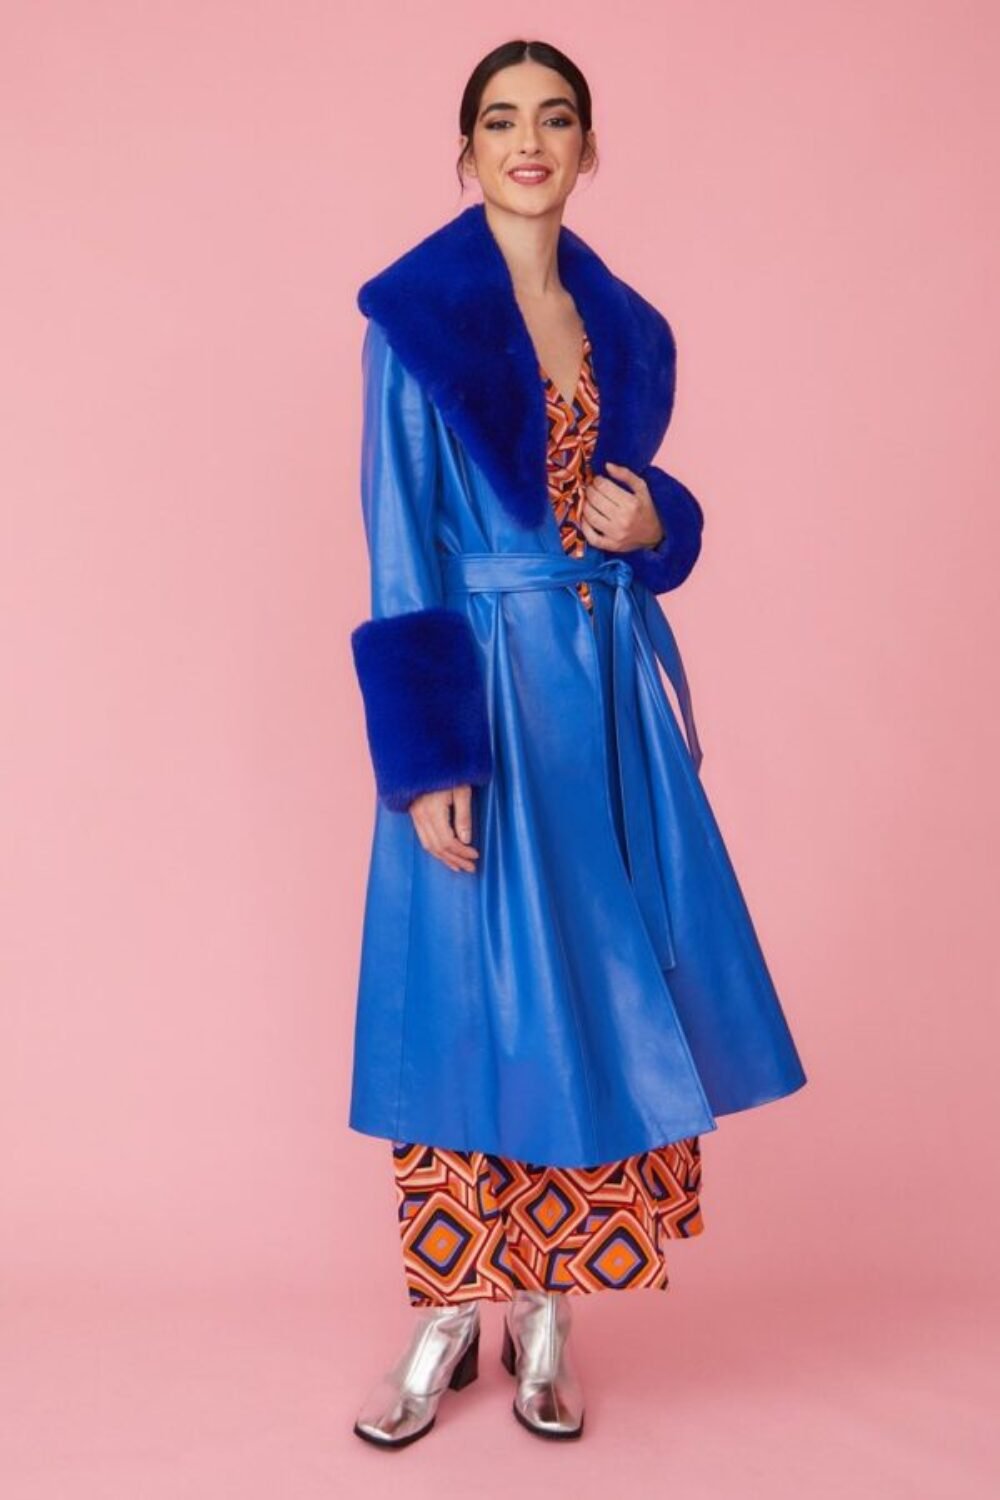 Shop Lux Blue Trench Style Belted Coat with Faux Fur Cuffs and Collar and women's luxury and designer clothes at www.lux-apparel.co.uk